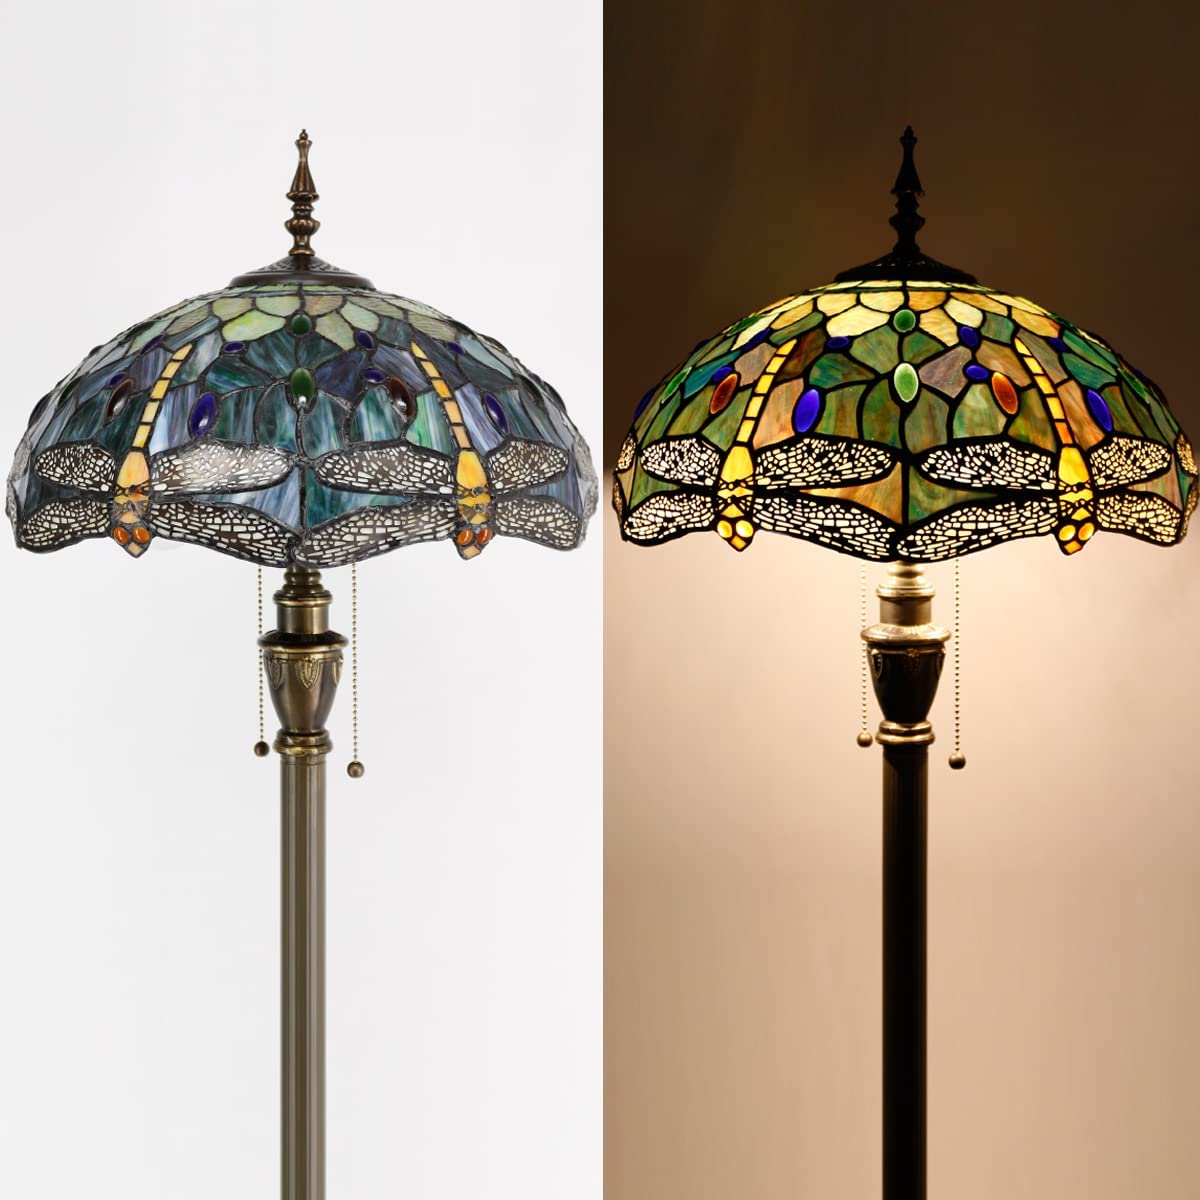 BBNBDMZ  Floor Lamp Stained Glass Butterfly Style Reading Lamp W16H70 Inch Tall Antique Standing Pole Light Bronze Finsh  Bright Lighting Decor  Corner Living Room Bedroom Office